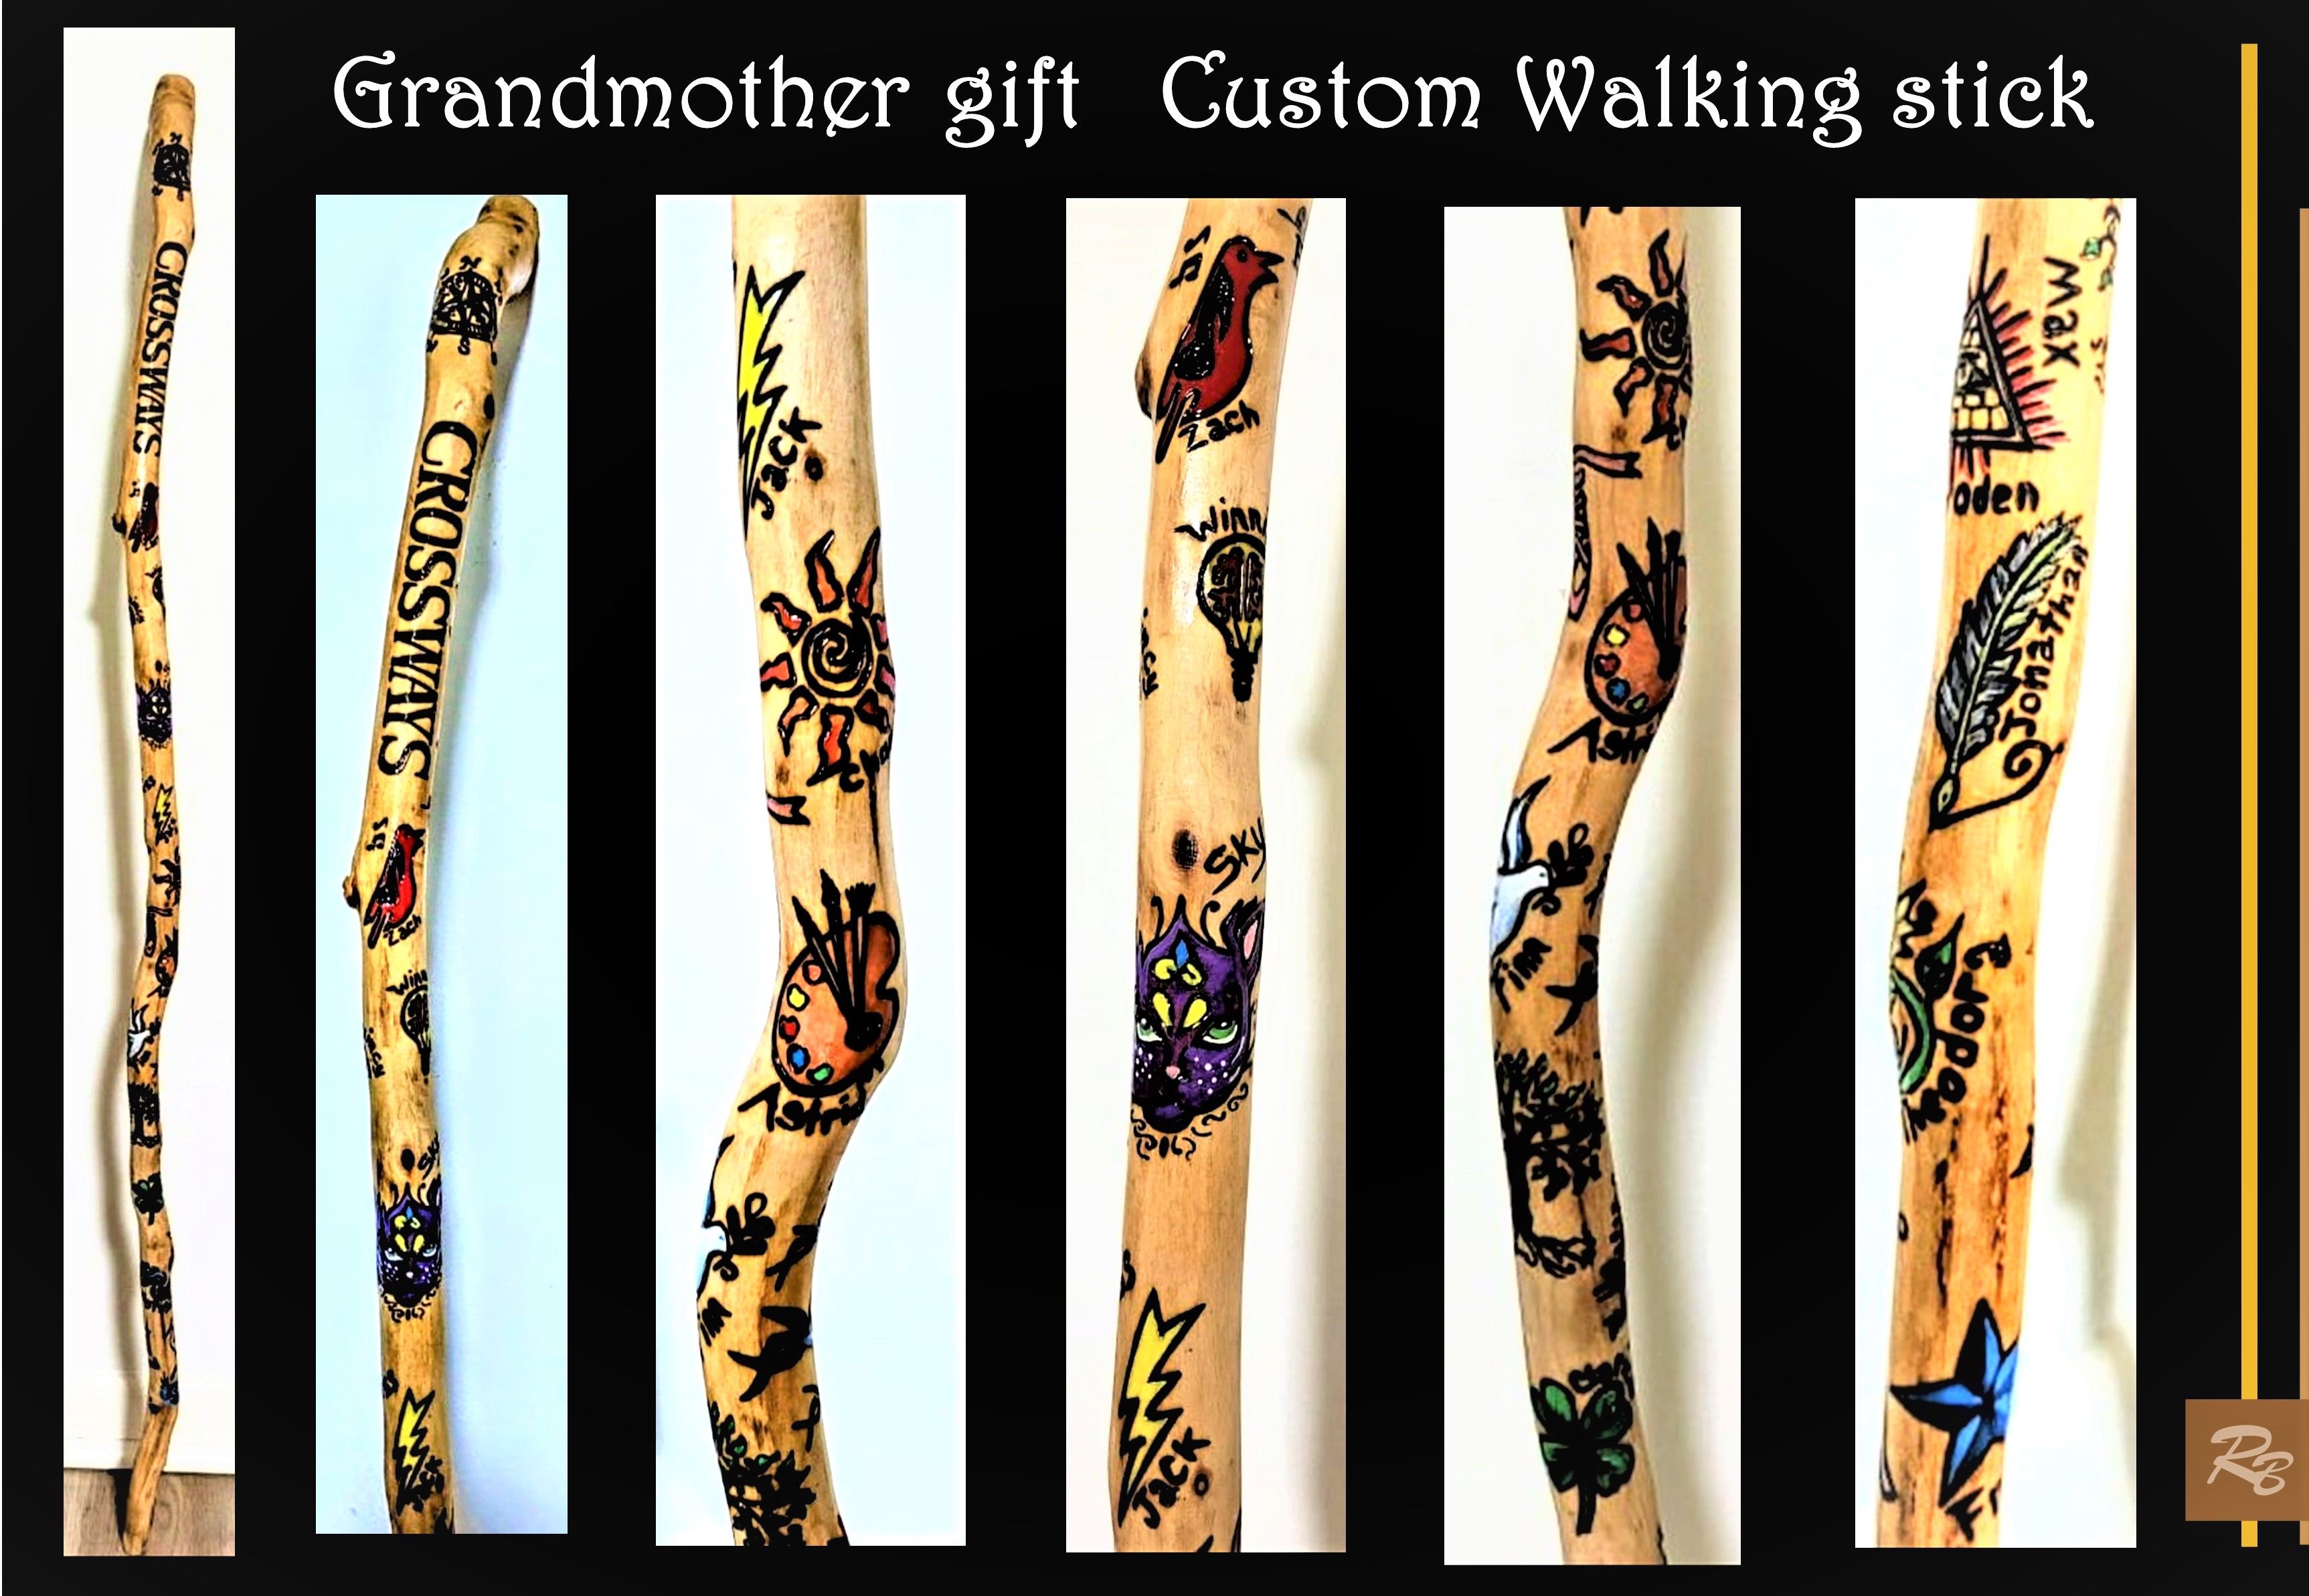 Custom, gifts,personalized, wood, signs, hiking sticks,anniversary